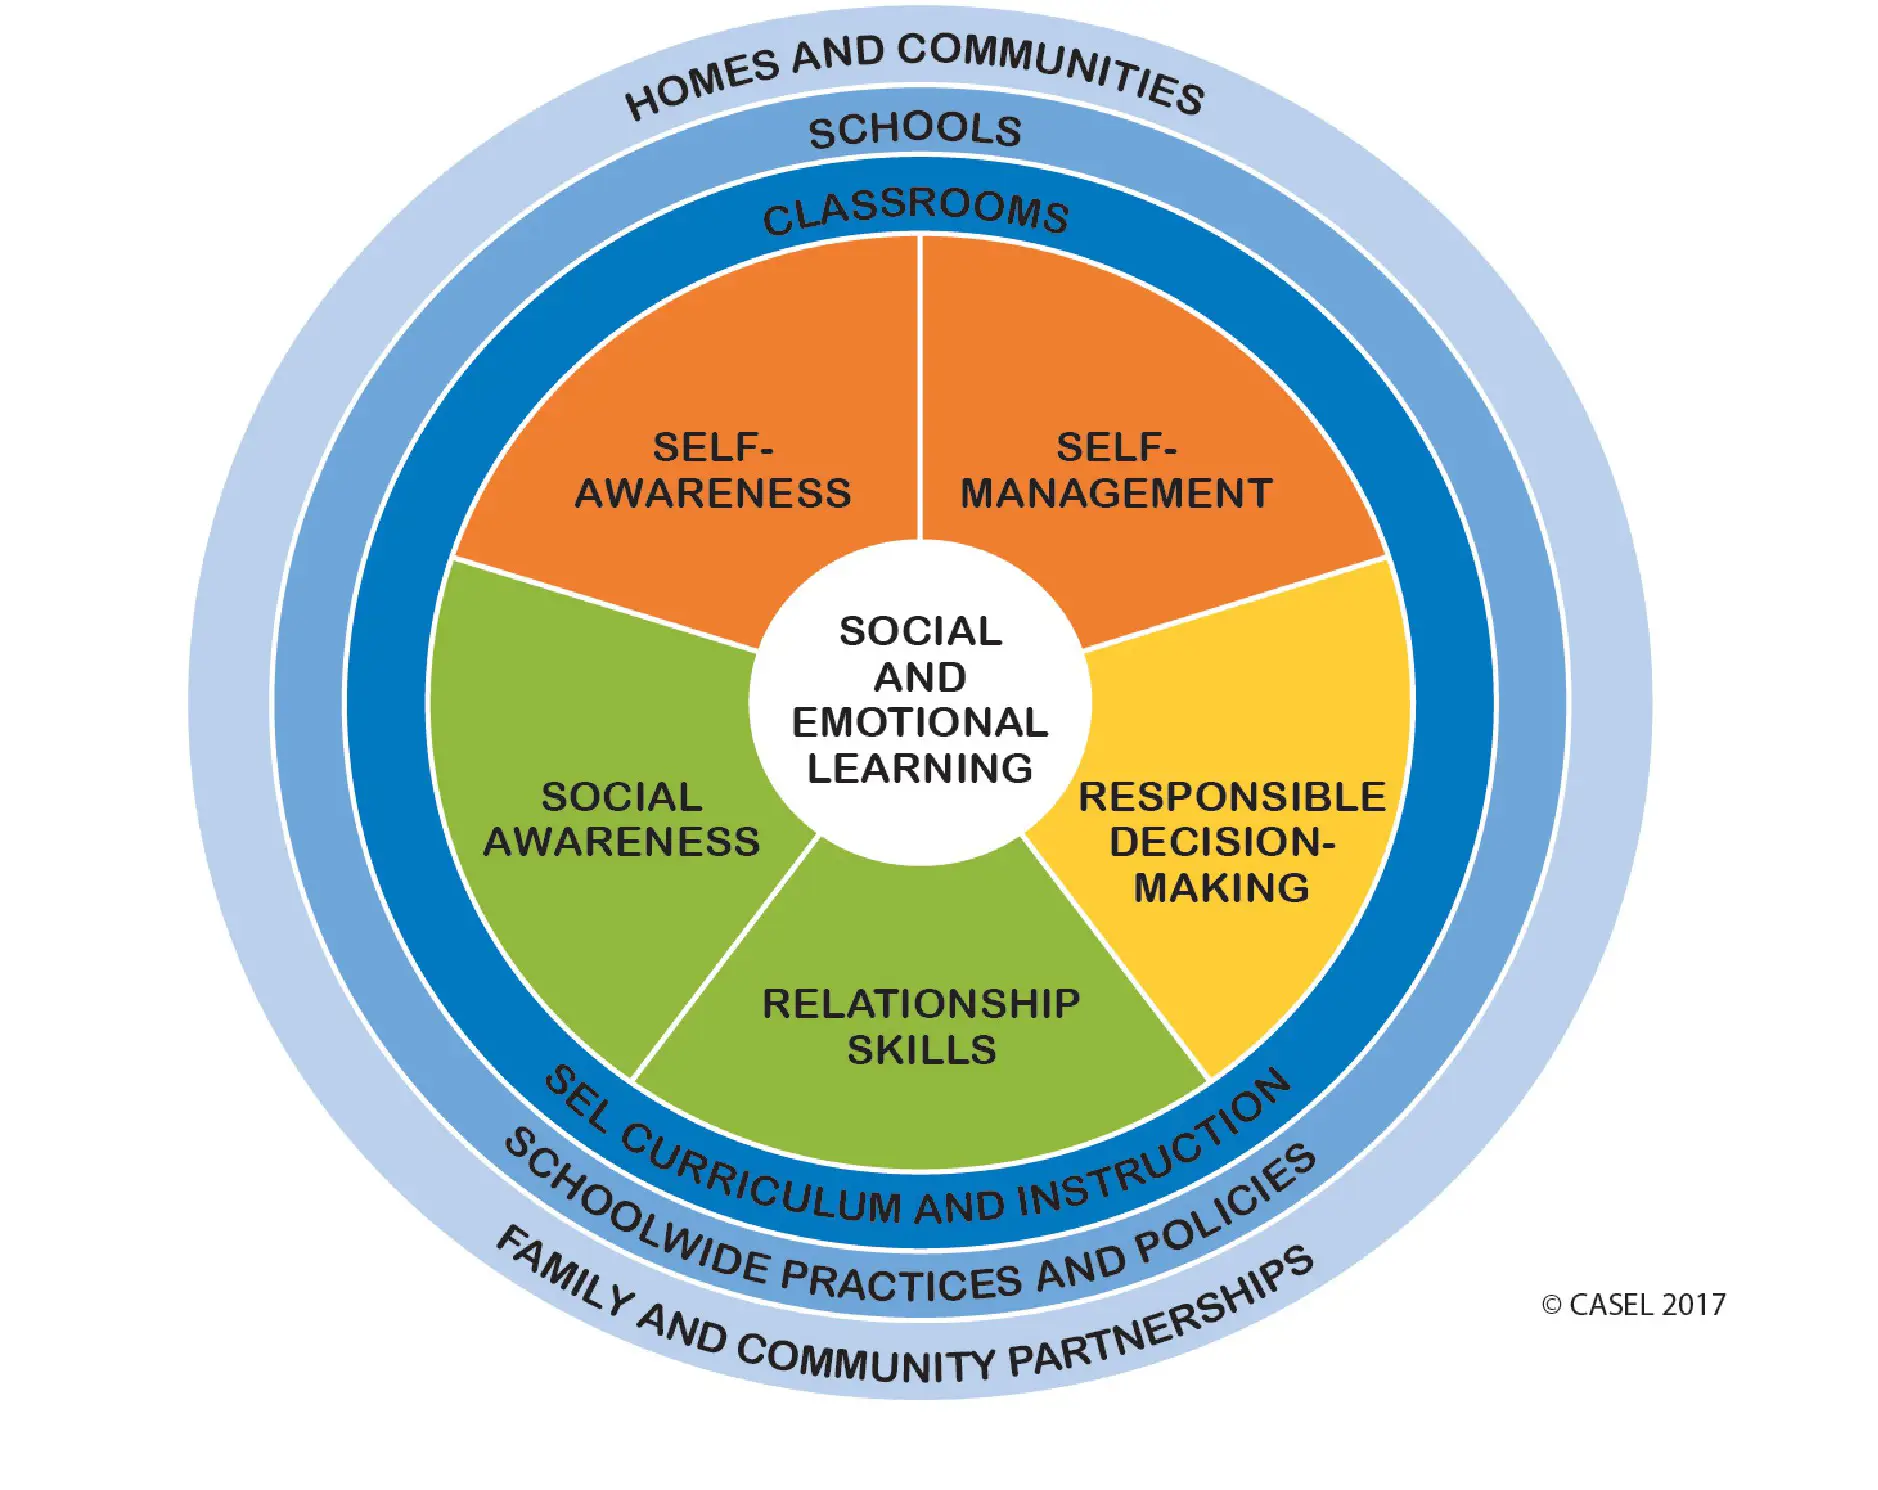 3. Core Components of Social-Emotional Learning